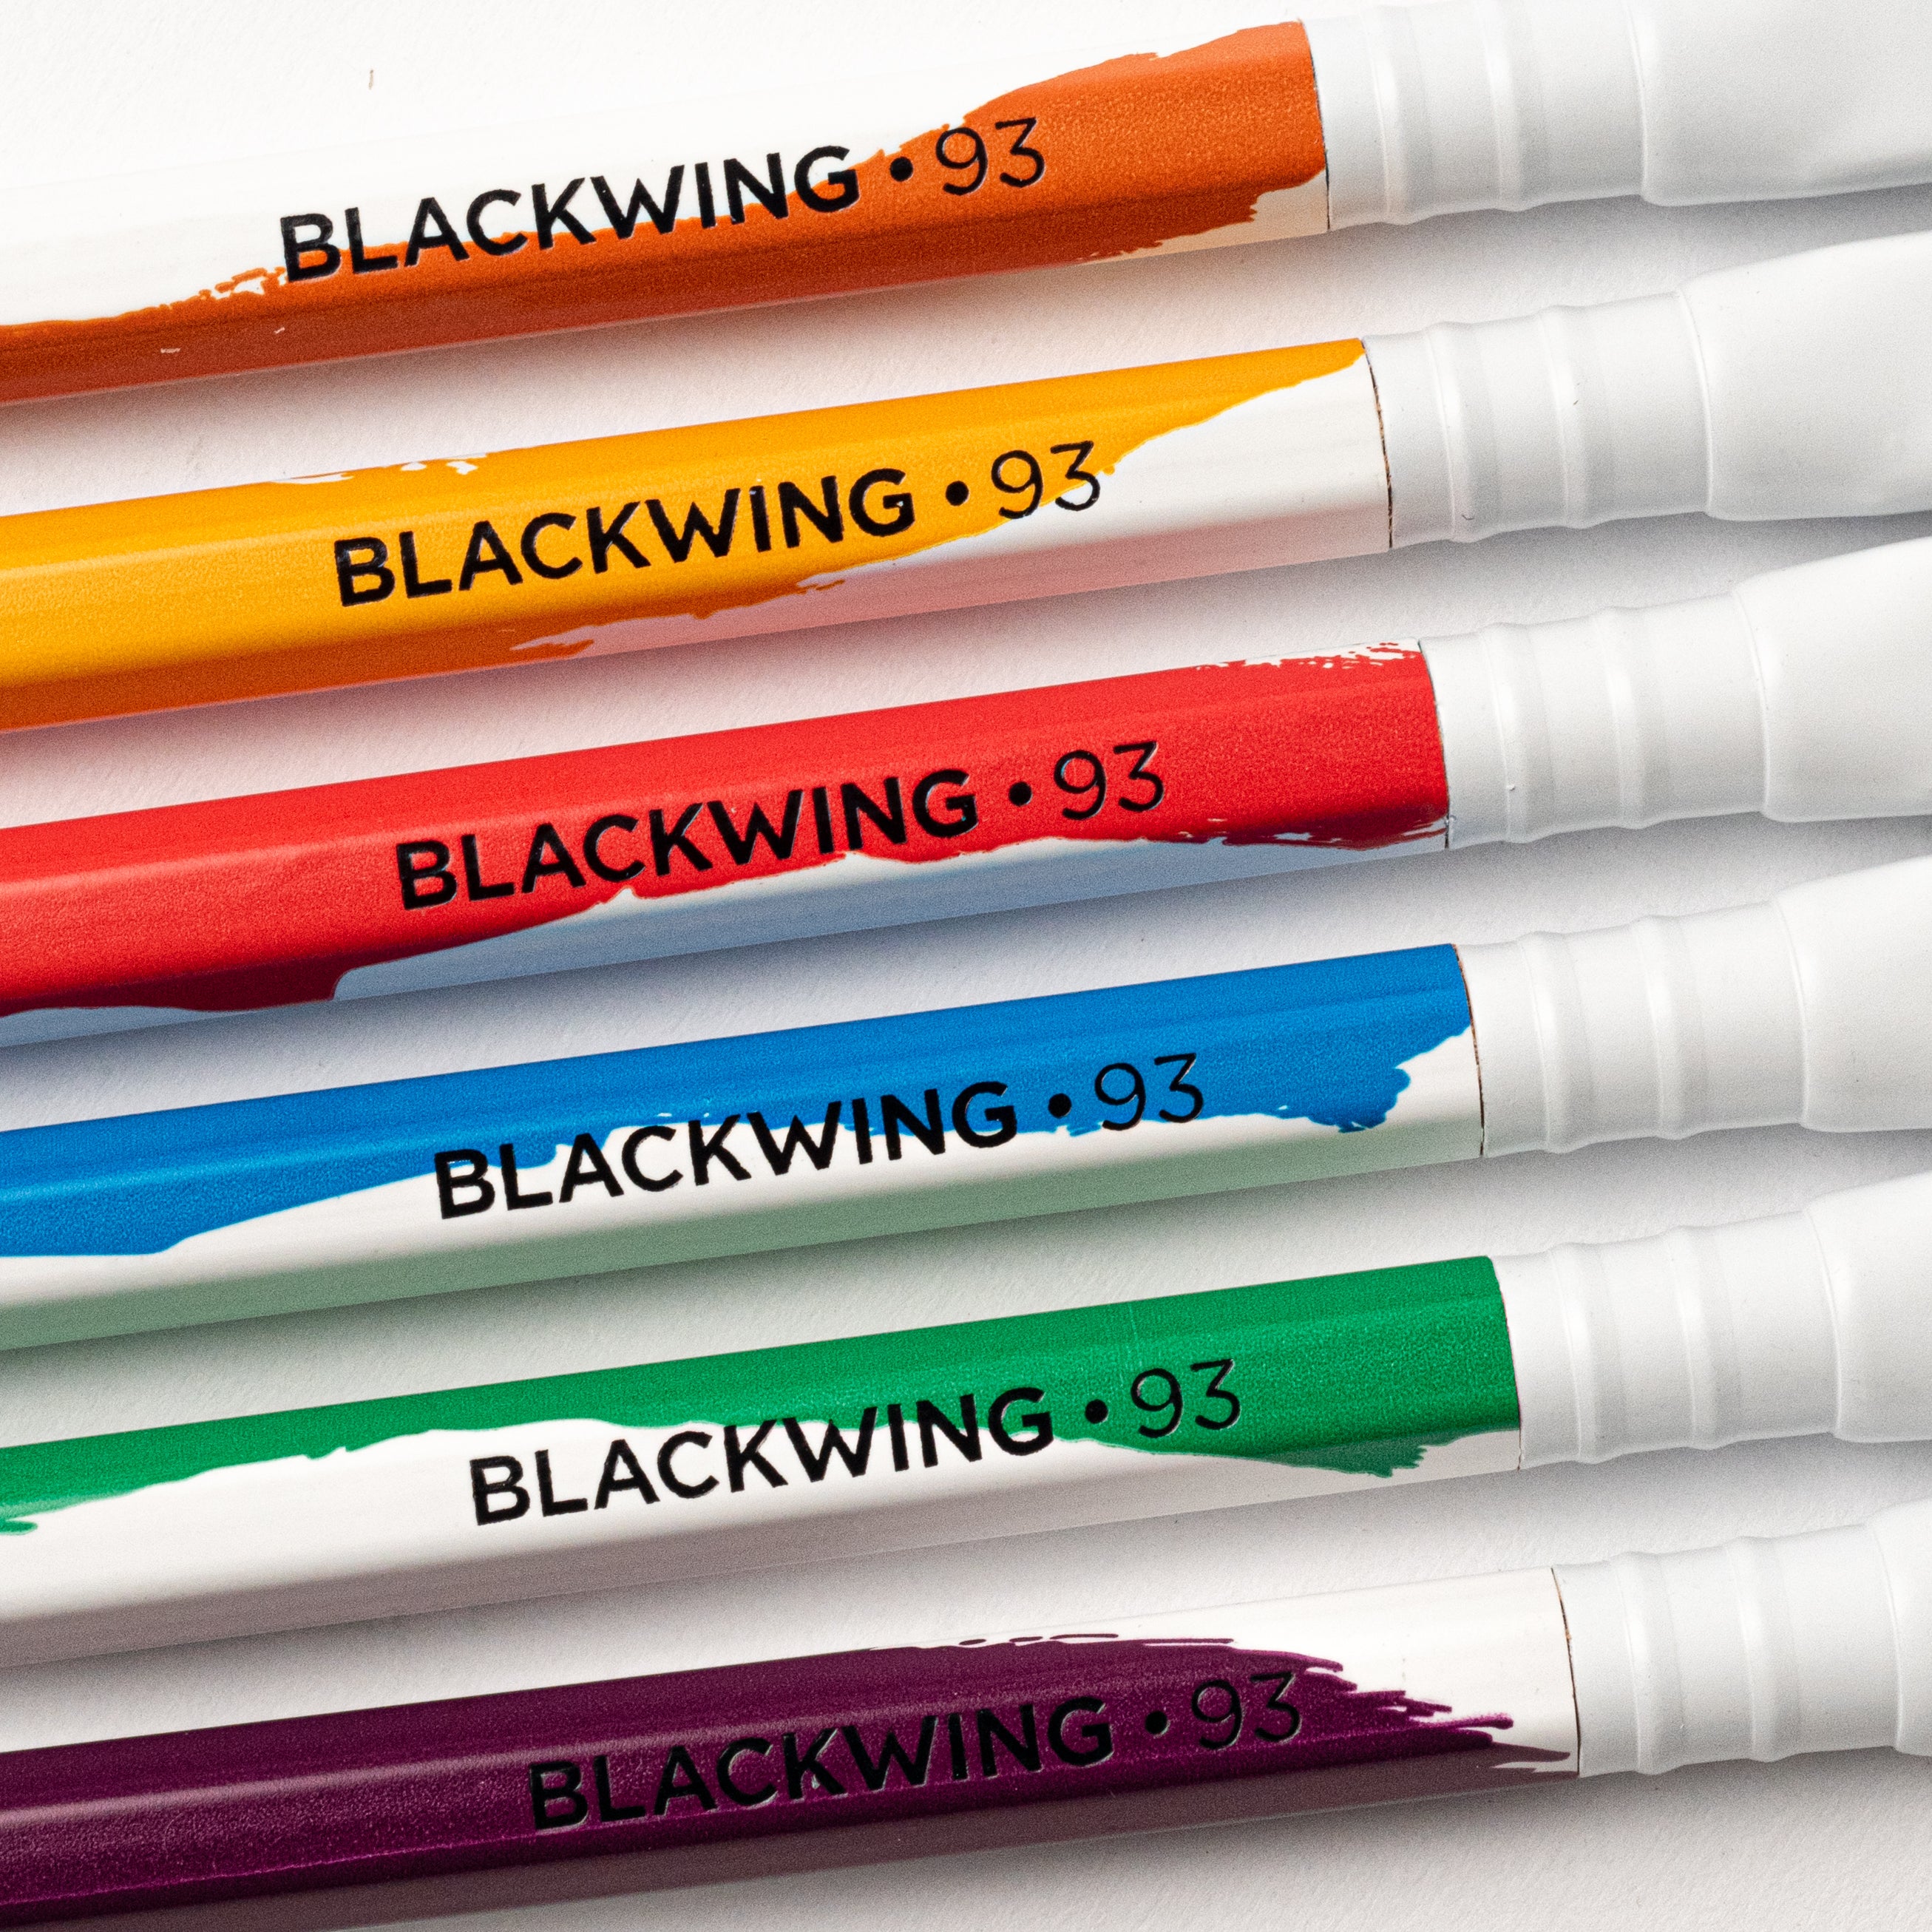 A set of Blackwing Volume 93 pencils with the word "blackwing" written on them, perfect for art projects and social justice campaigns.